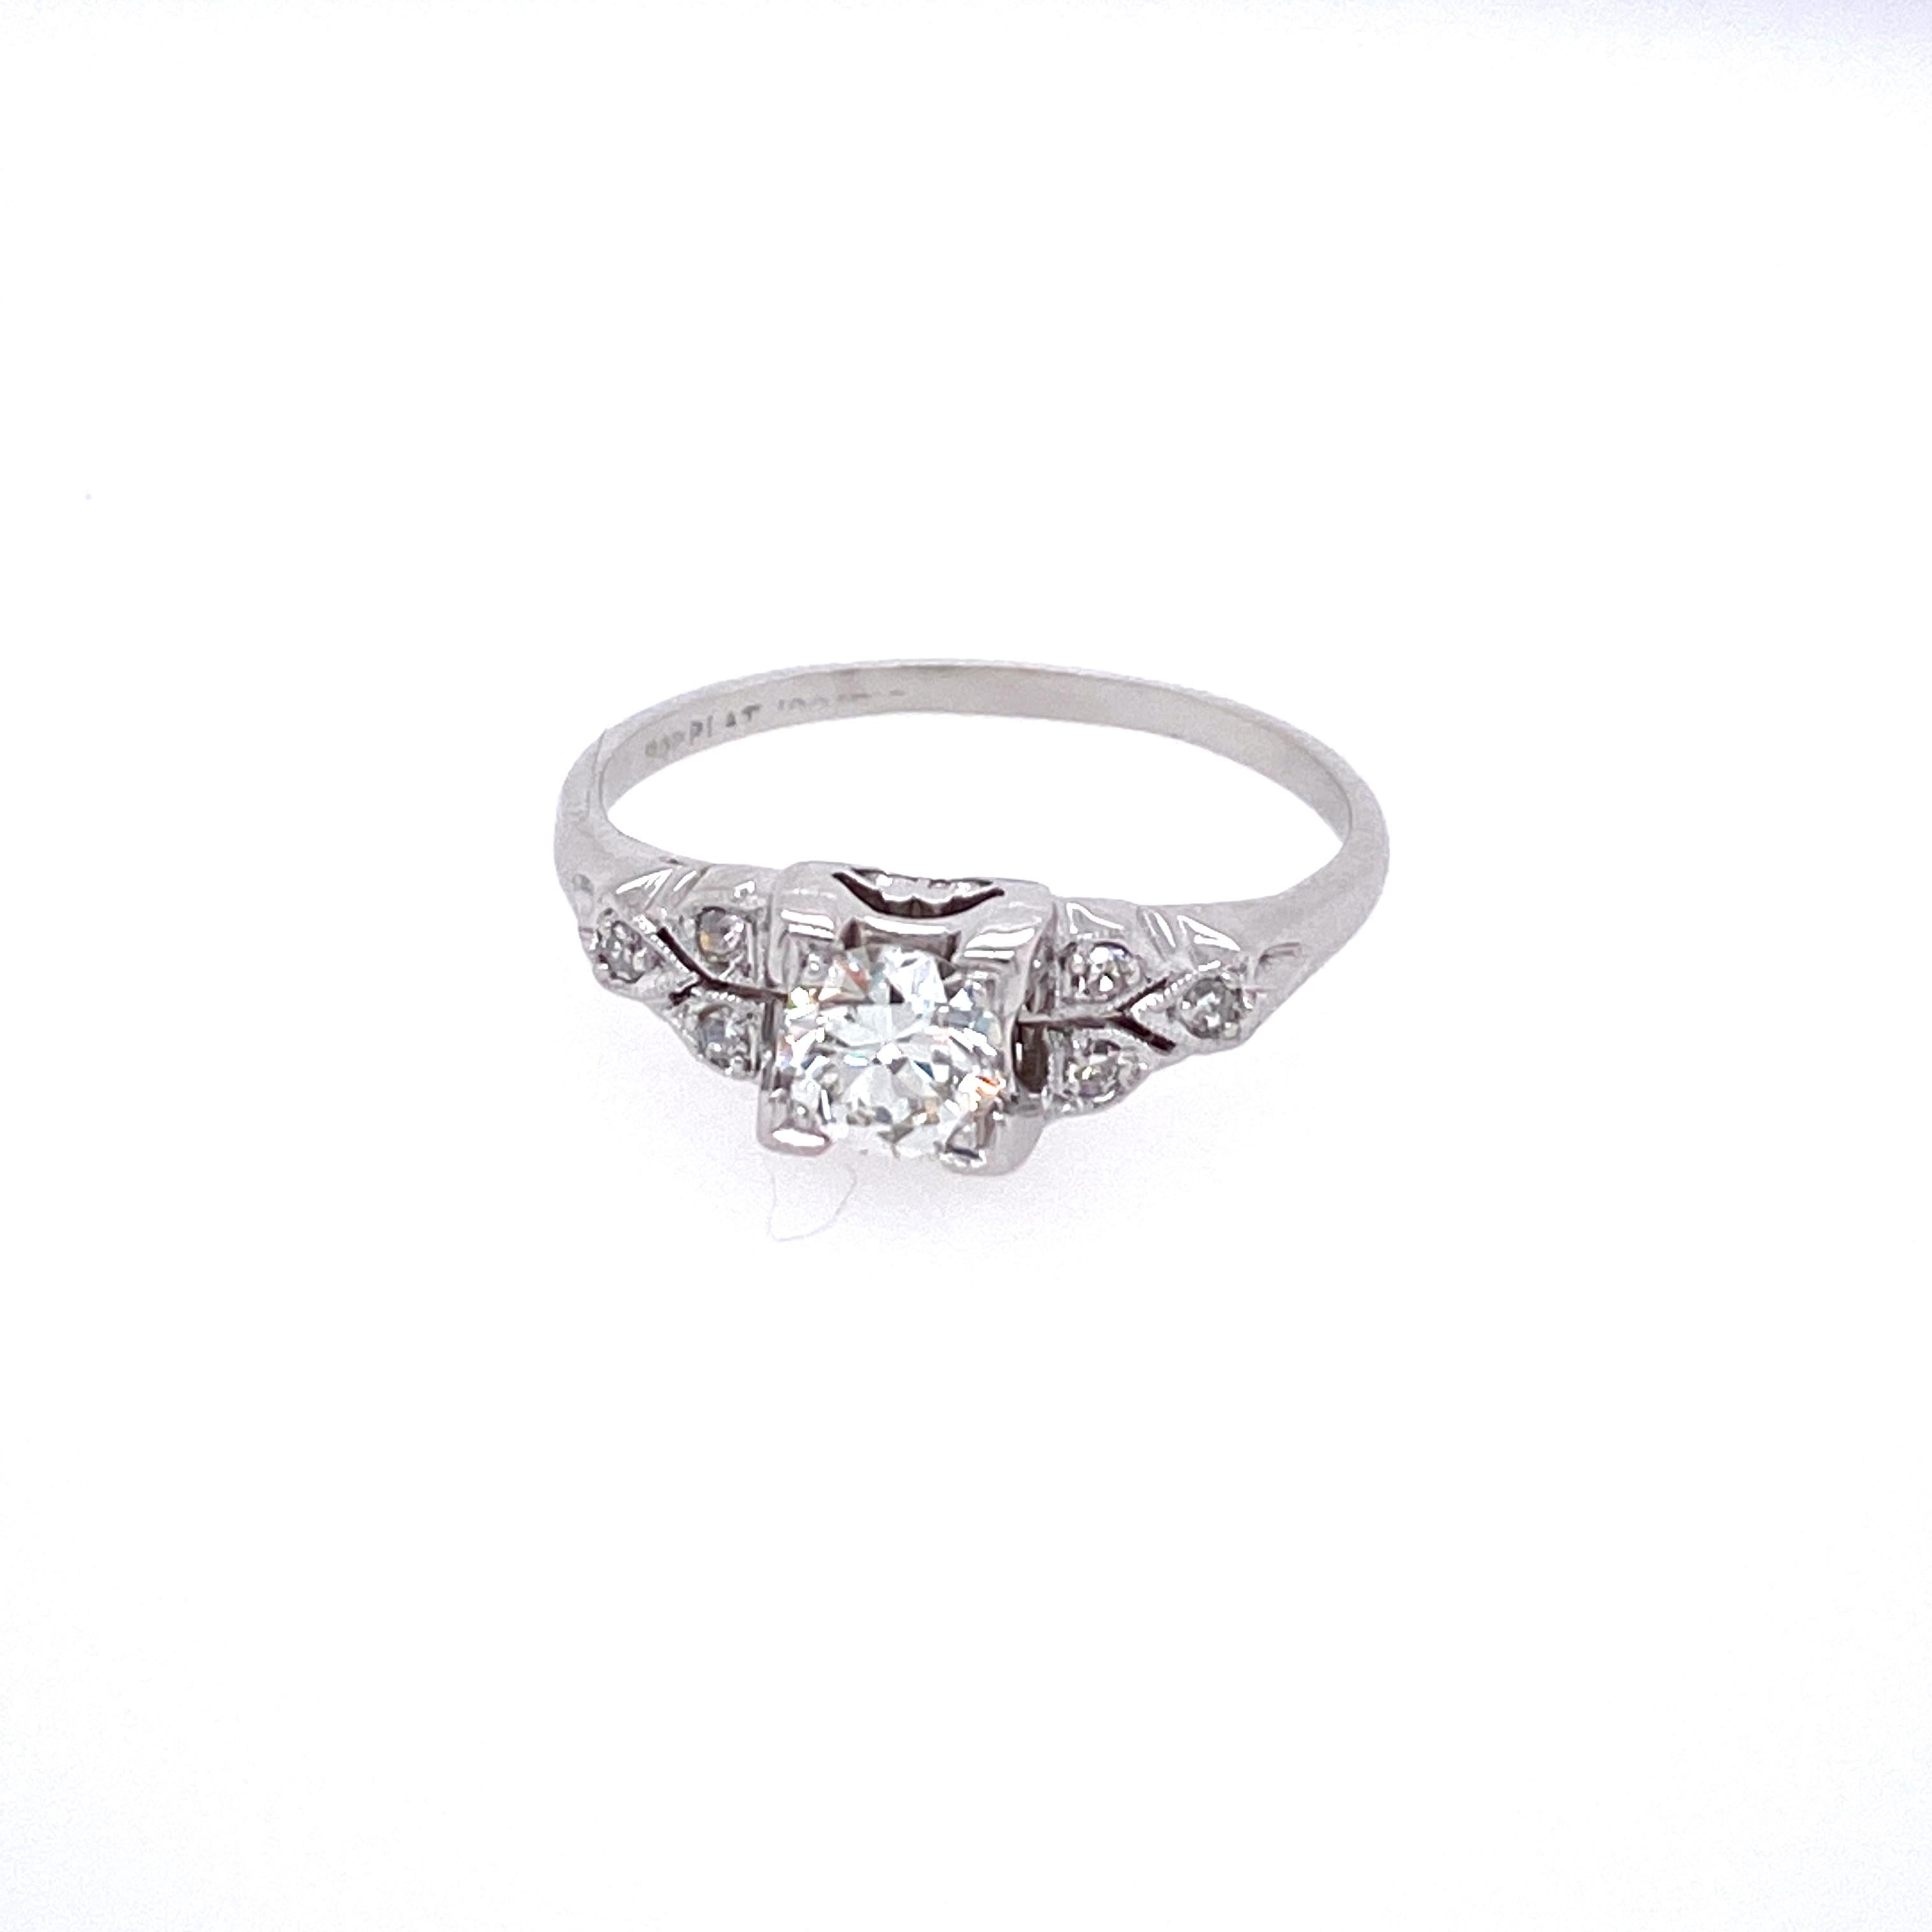 One platinum (stamped 900PT-4T) Retro diamond engagement ring featuring one 0.38 carat Old European cut center diamond with H/I color and SI1/SI2 clarity and six single cut diamonds approximately 0.12 carat total weight with matching H/I color and